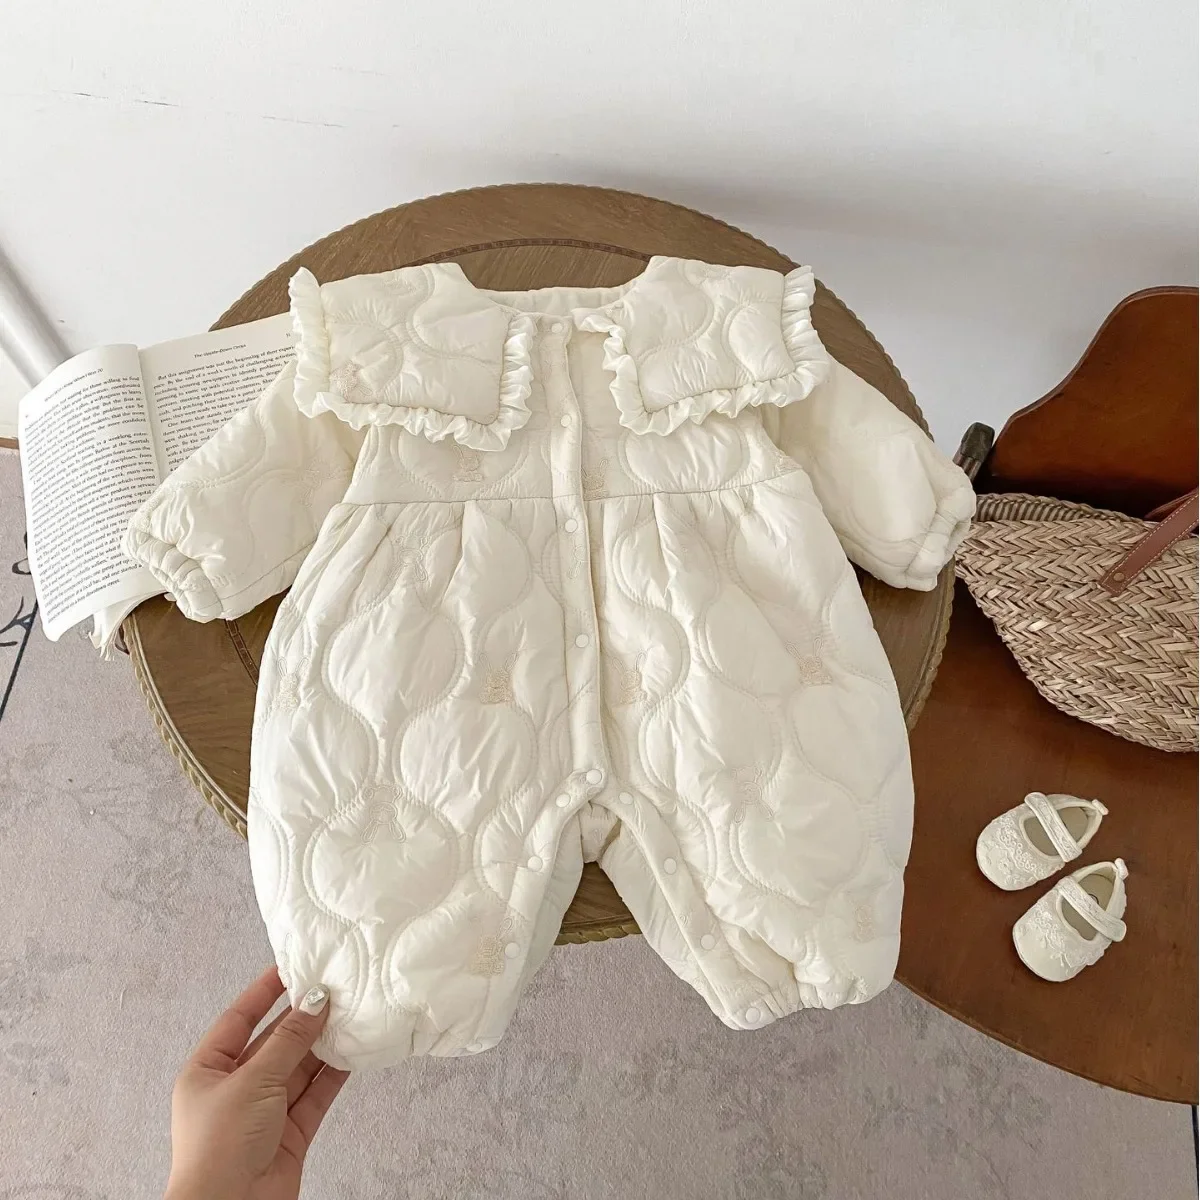 

Clothes Autumn and Winter One-piece Crawling Baby Girls Romper Baby Girl Bodysuit Long Sleeves New Born Baby Items Bodysuit